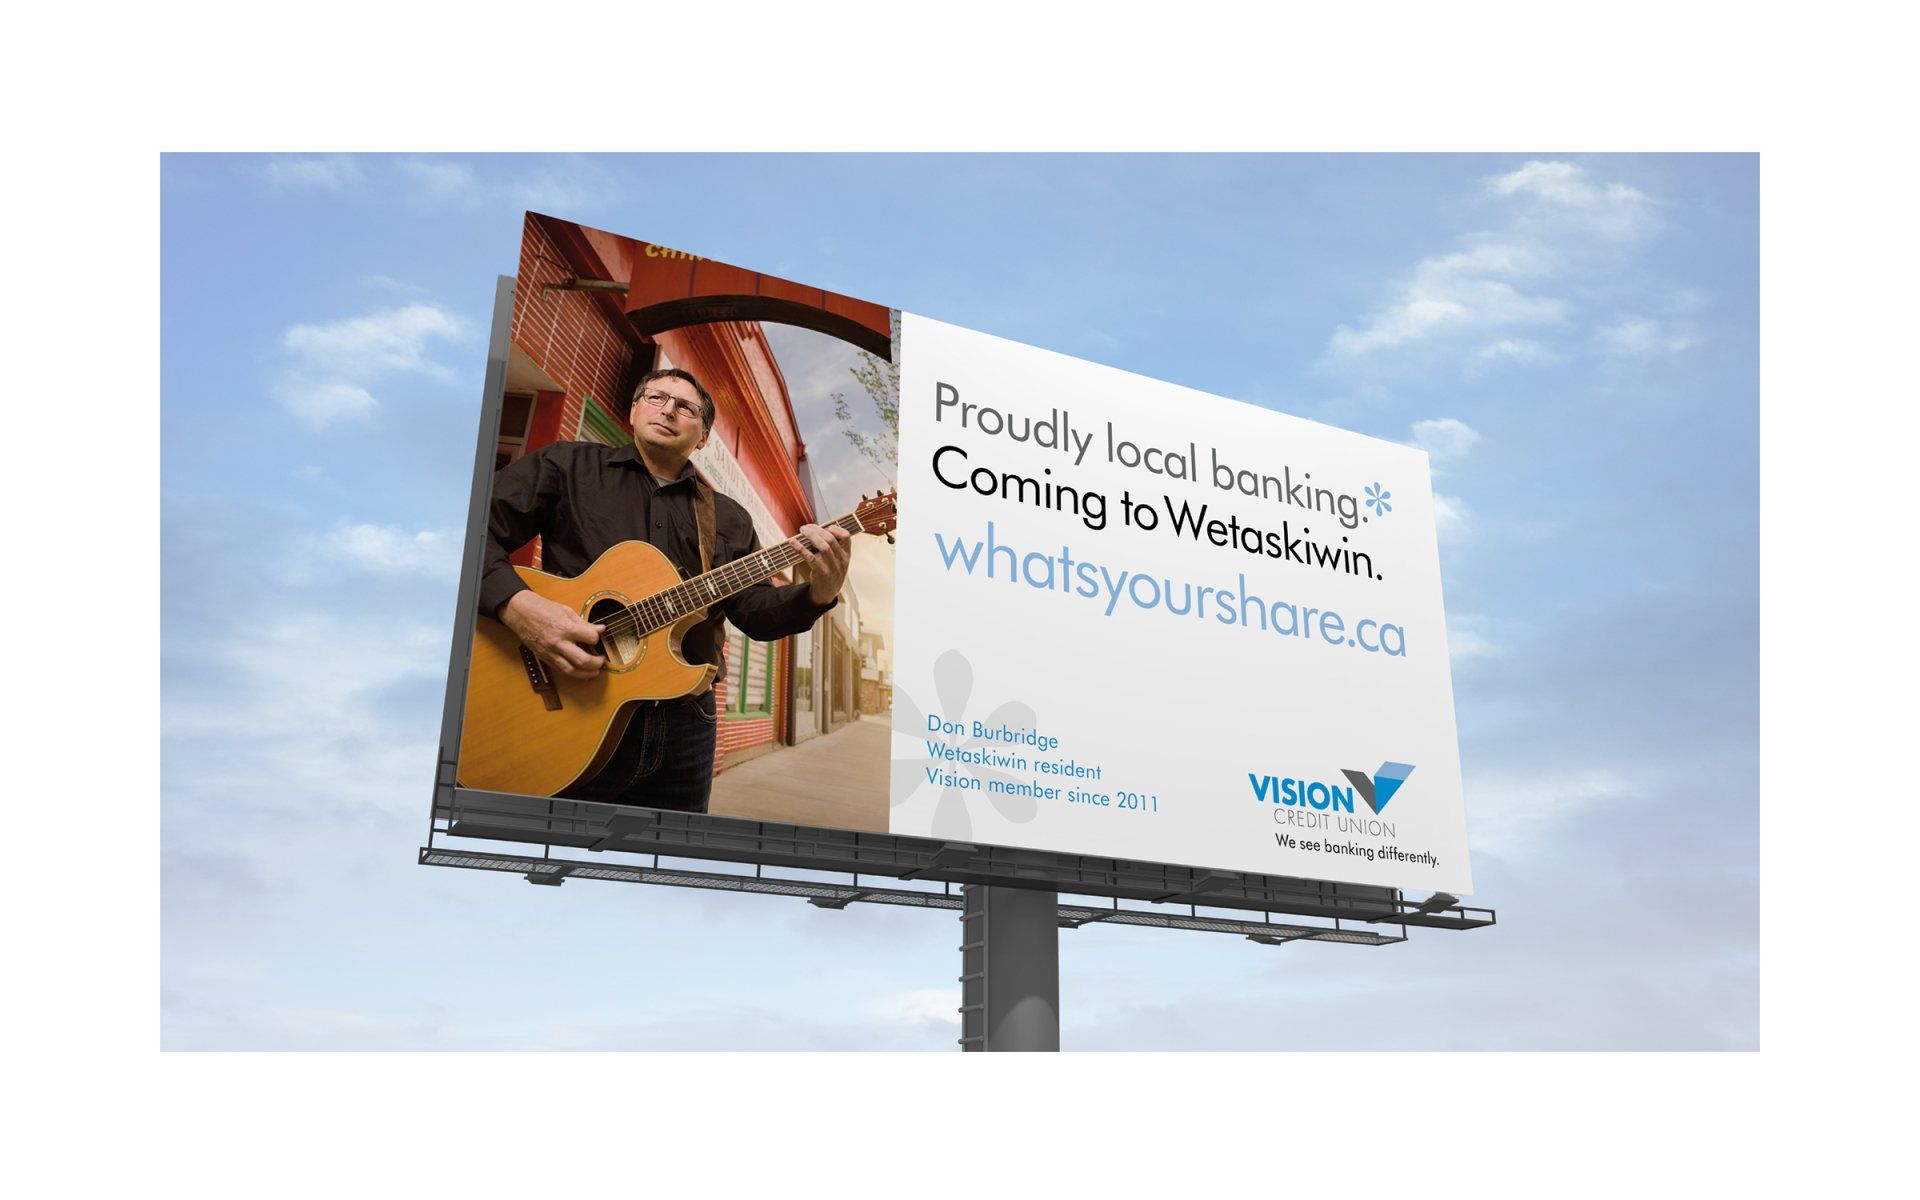 BILLBOARD ADVERTISING IN WETASKIWIN ALBERTA FOR VISION CREDIT UNION BY IVY DESIGN INC